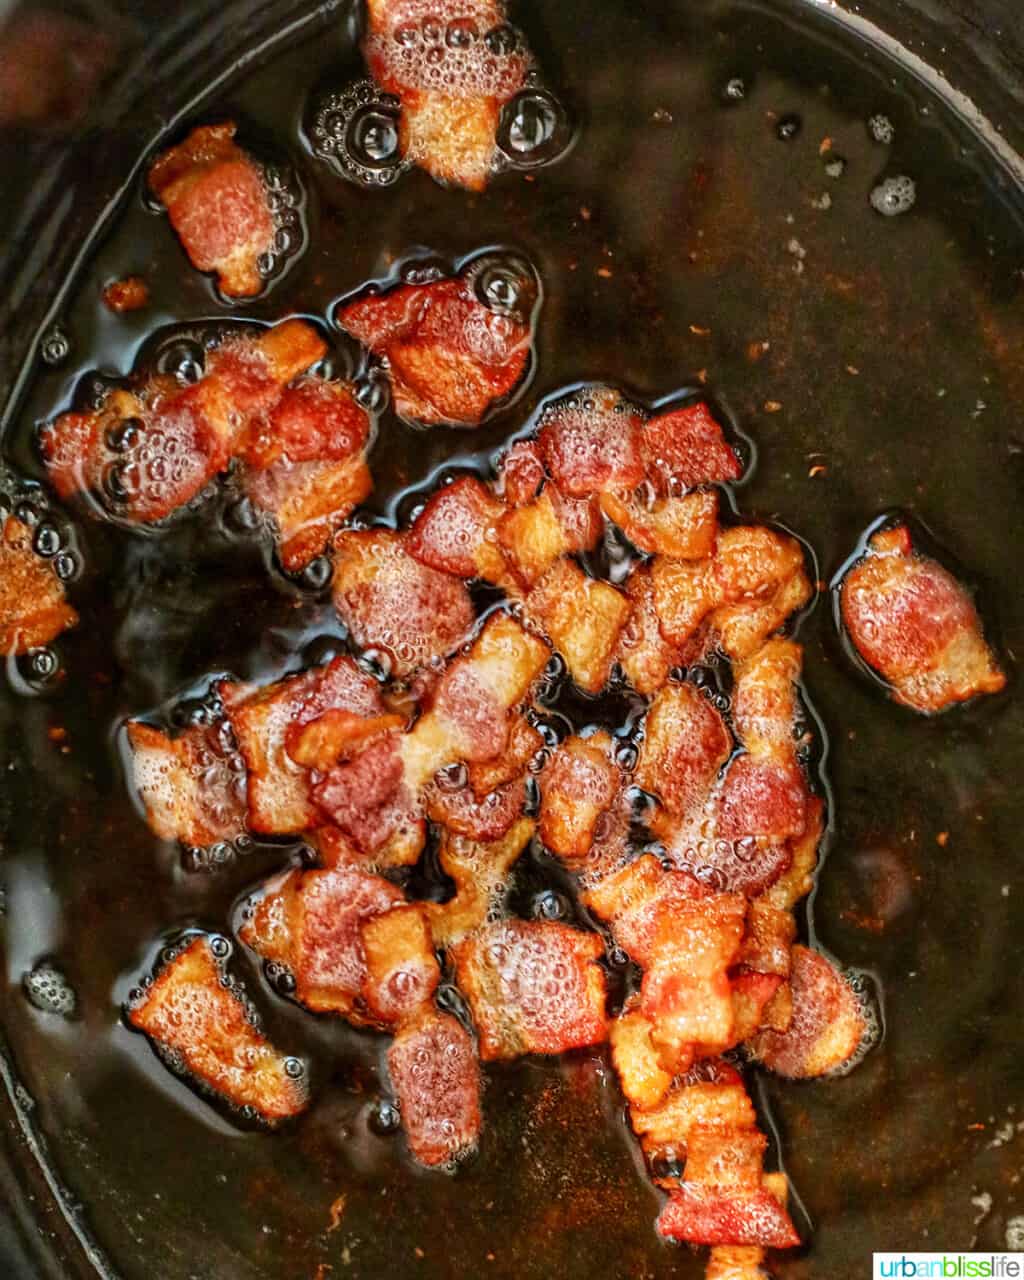 cooked bacon sizzling in Dutch oven